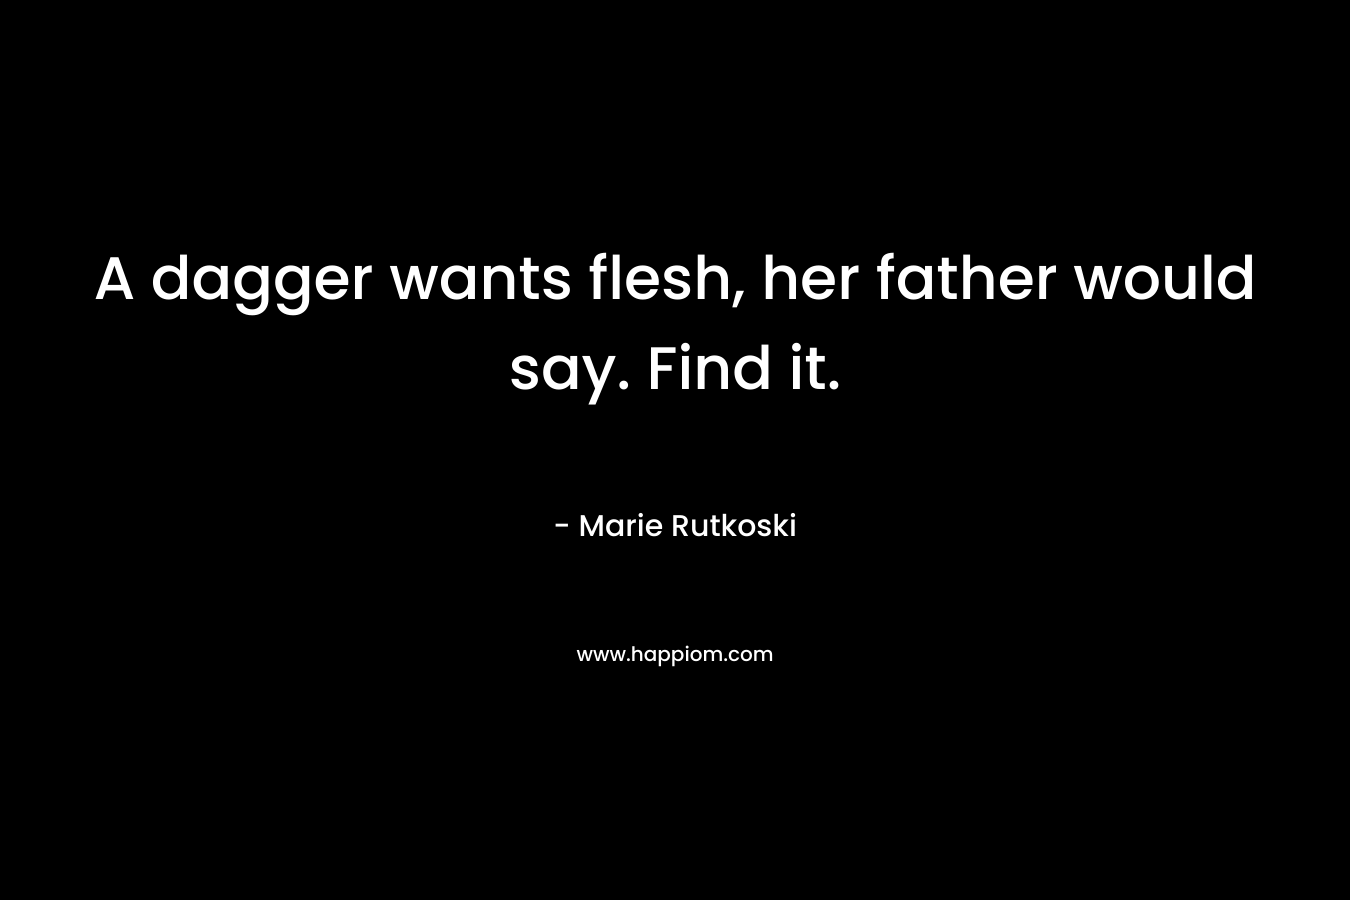 A dagger wants flesh, her father would say. Find it. – Marie Rutkoski